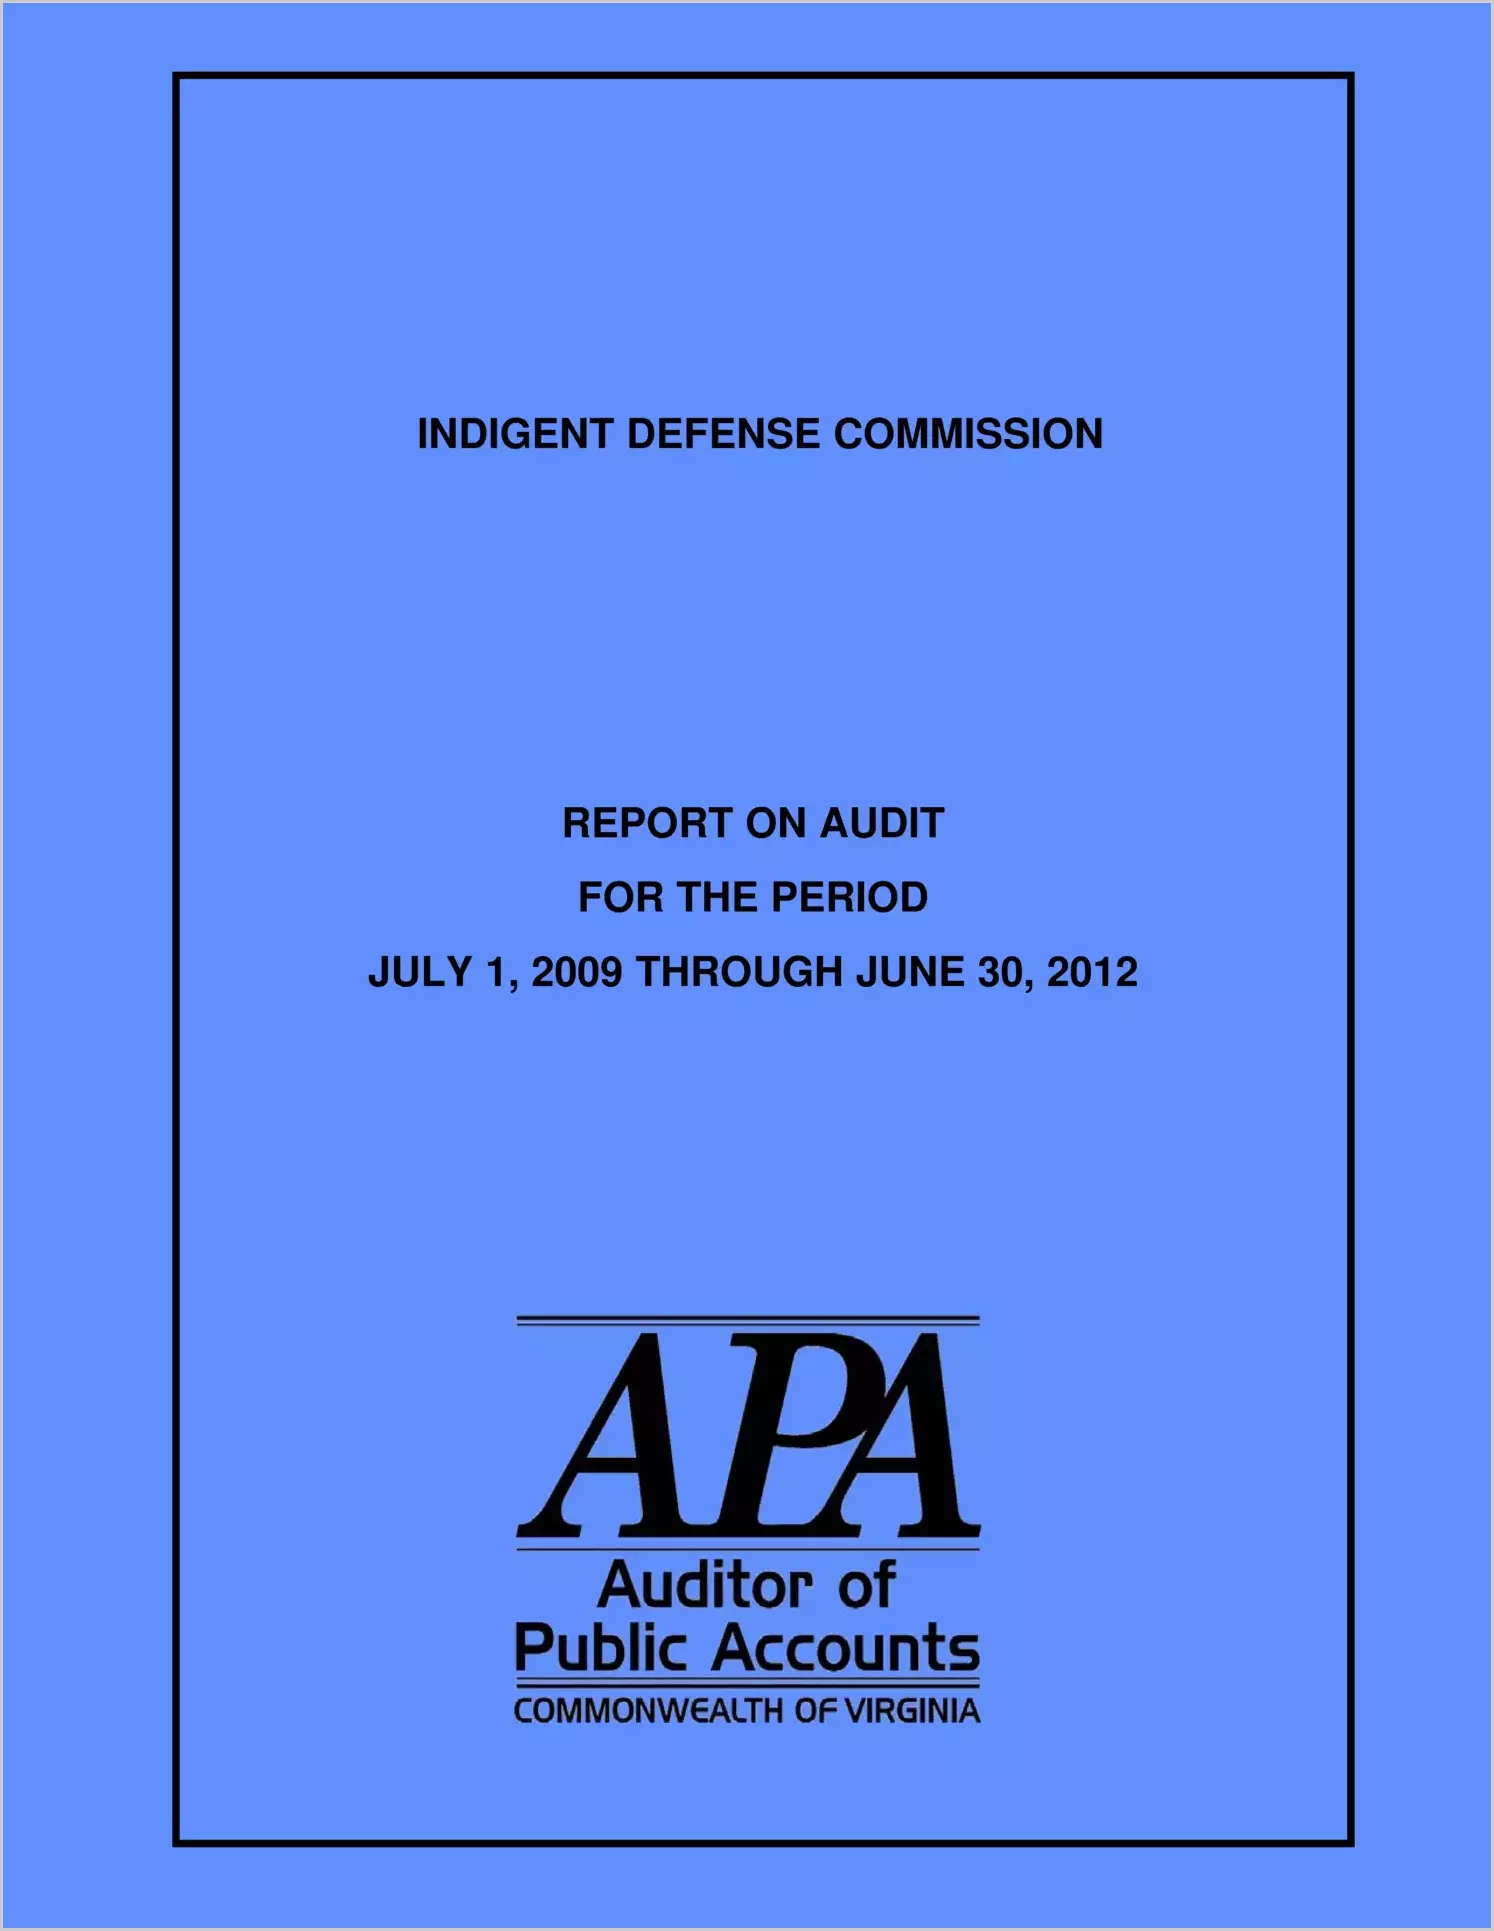 Indigent Defense Commission for the period July 1, 2009 Through June 30, 2012